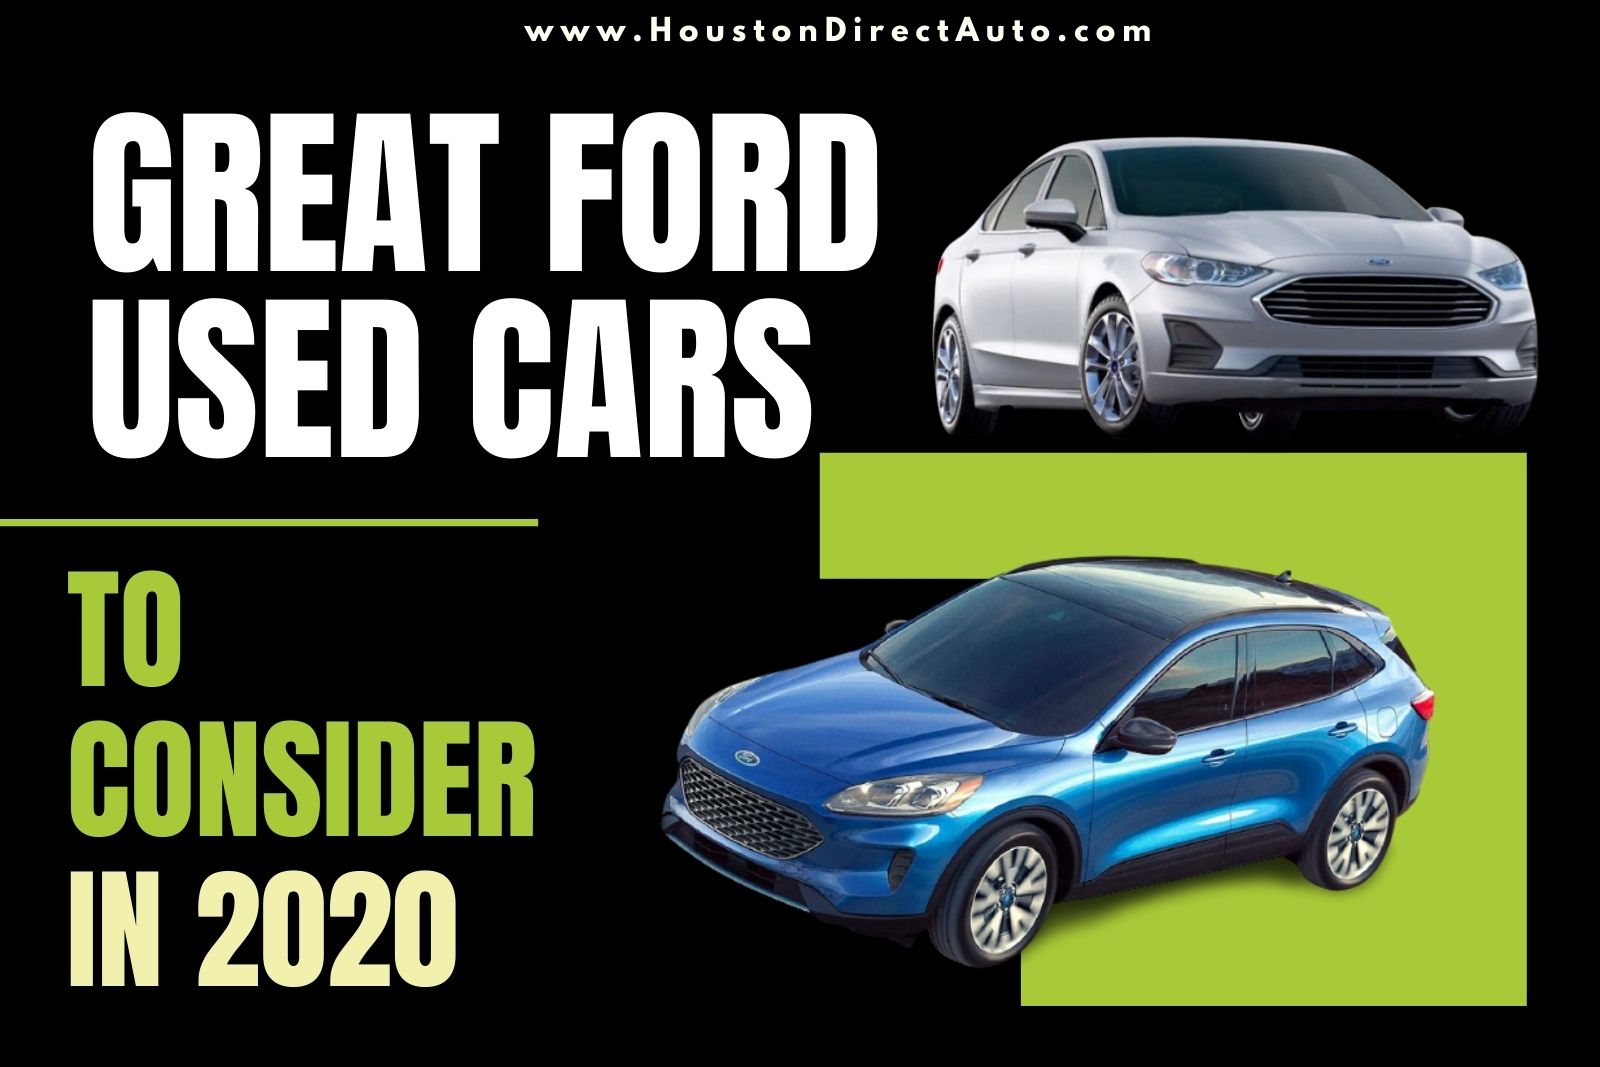 Great Ford Used Cars To Consider In 2020